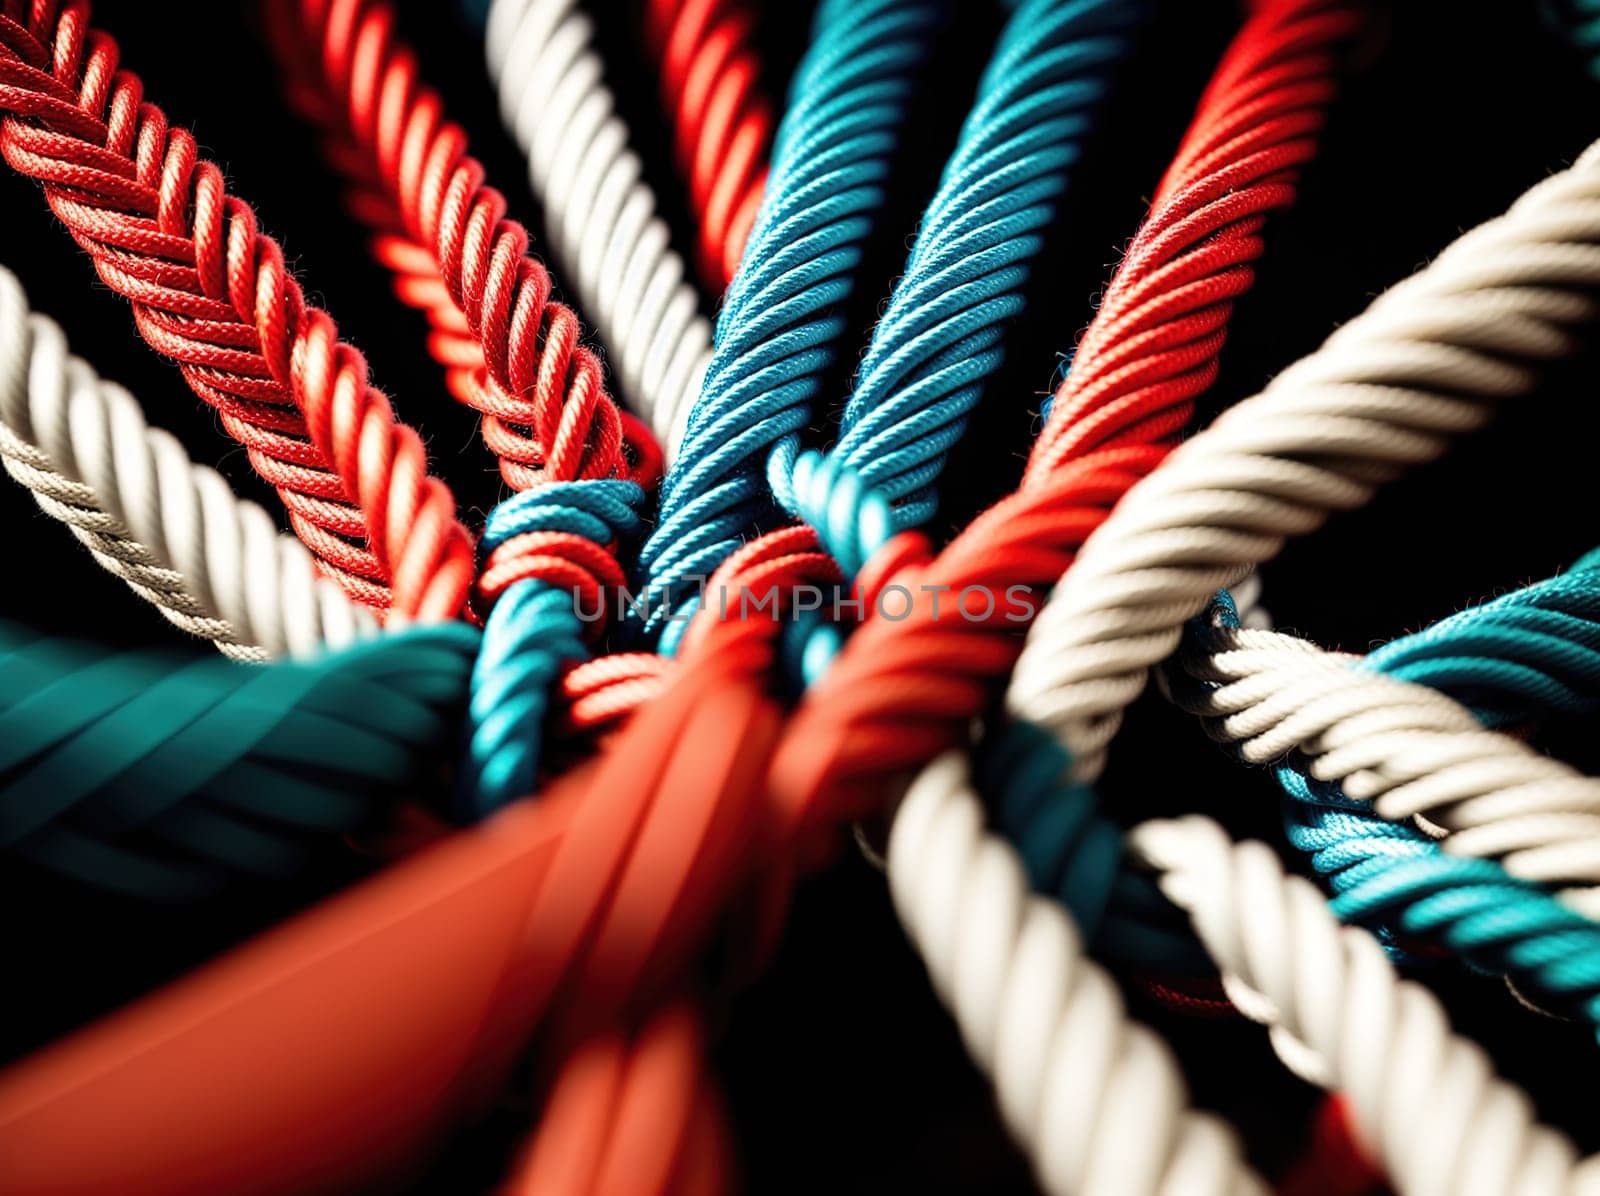 The image is a rope made of red, blue, and green ropes.